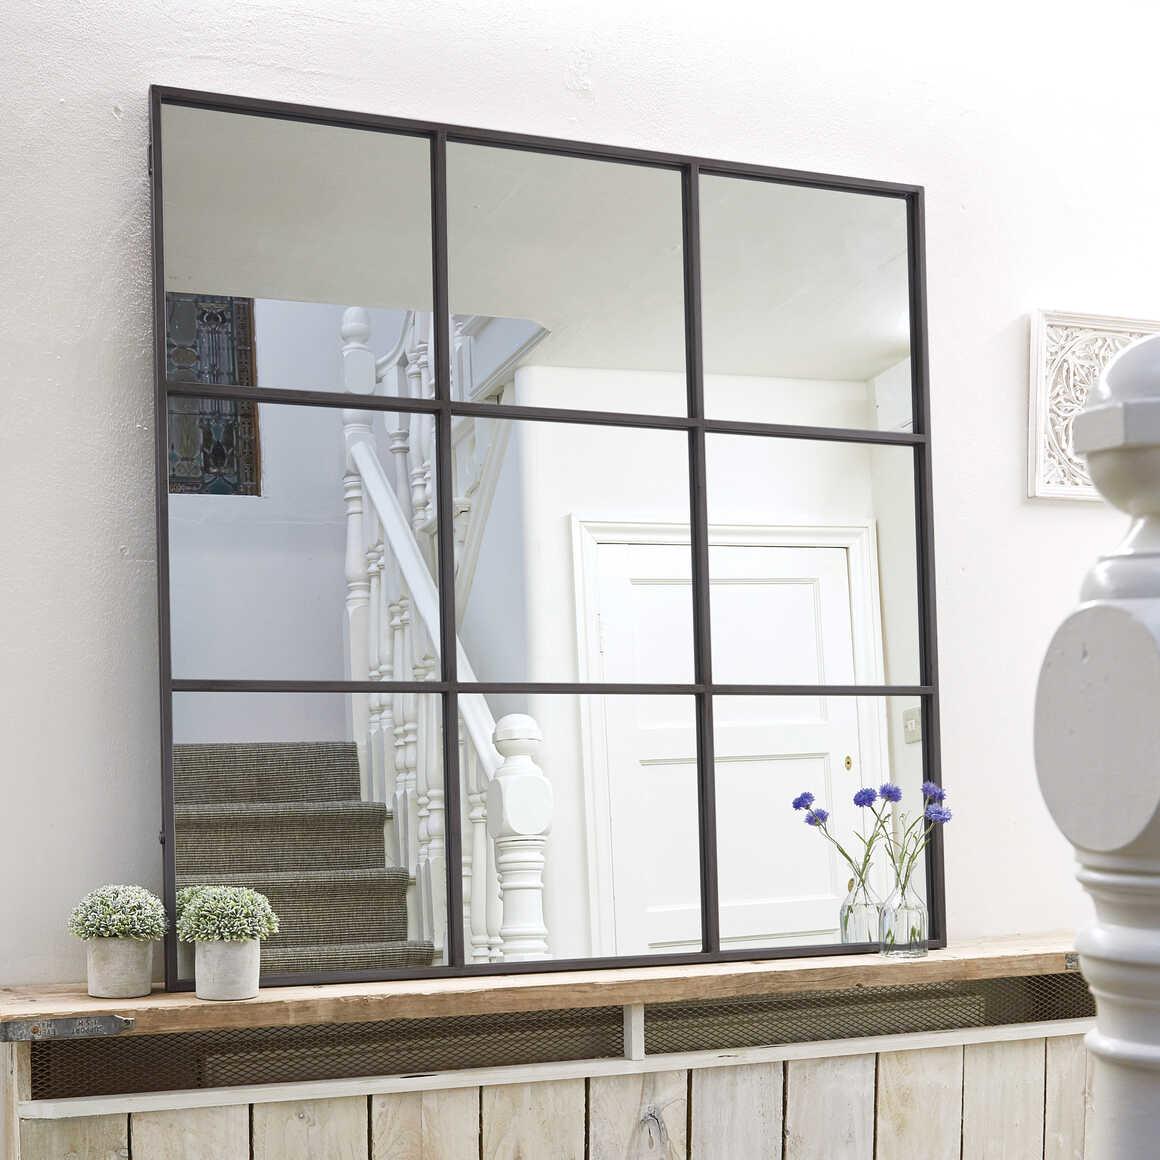 loft style window mirrors and industrial mirrors our speciality